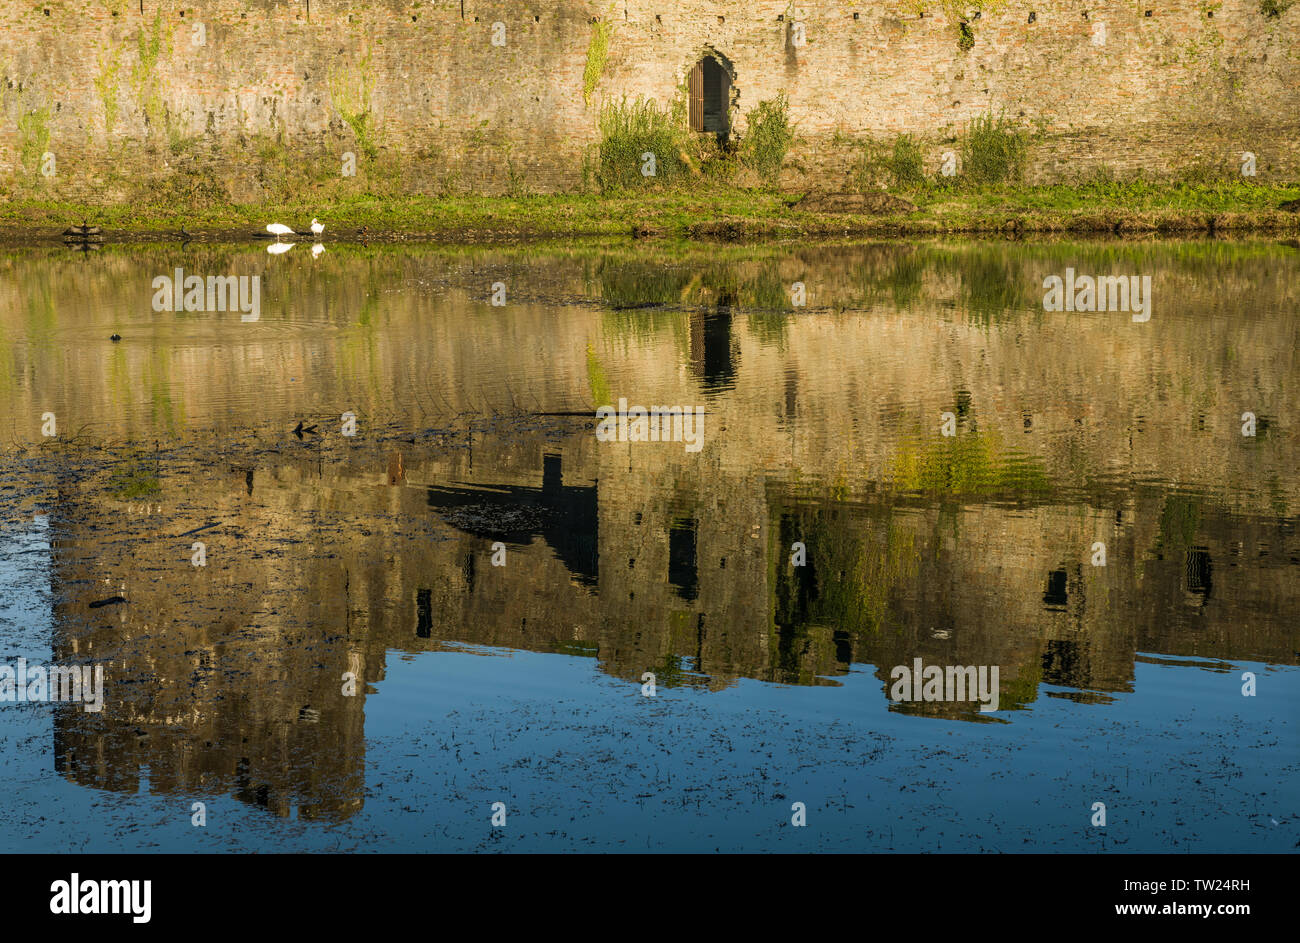 Caerphilly Castle reflected in the castle moat, Caerphilly in South Wales. Caerphilly is the second largest castle in the UK, after Windsor. Stock Photo